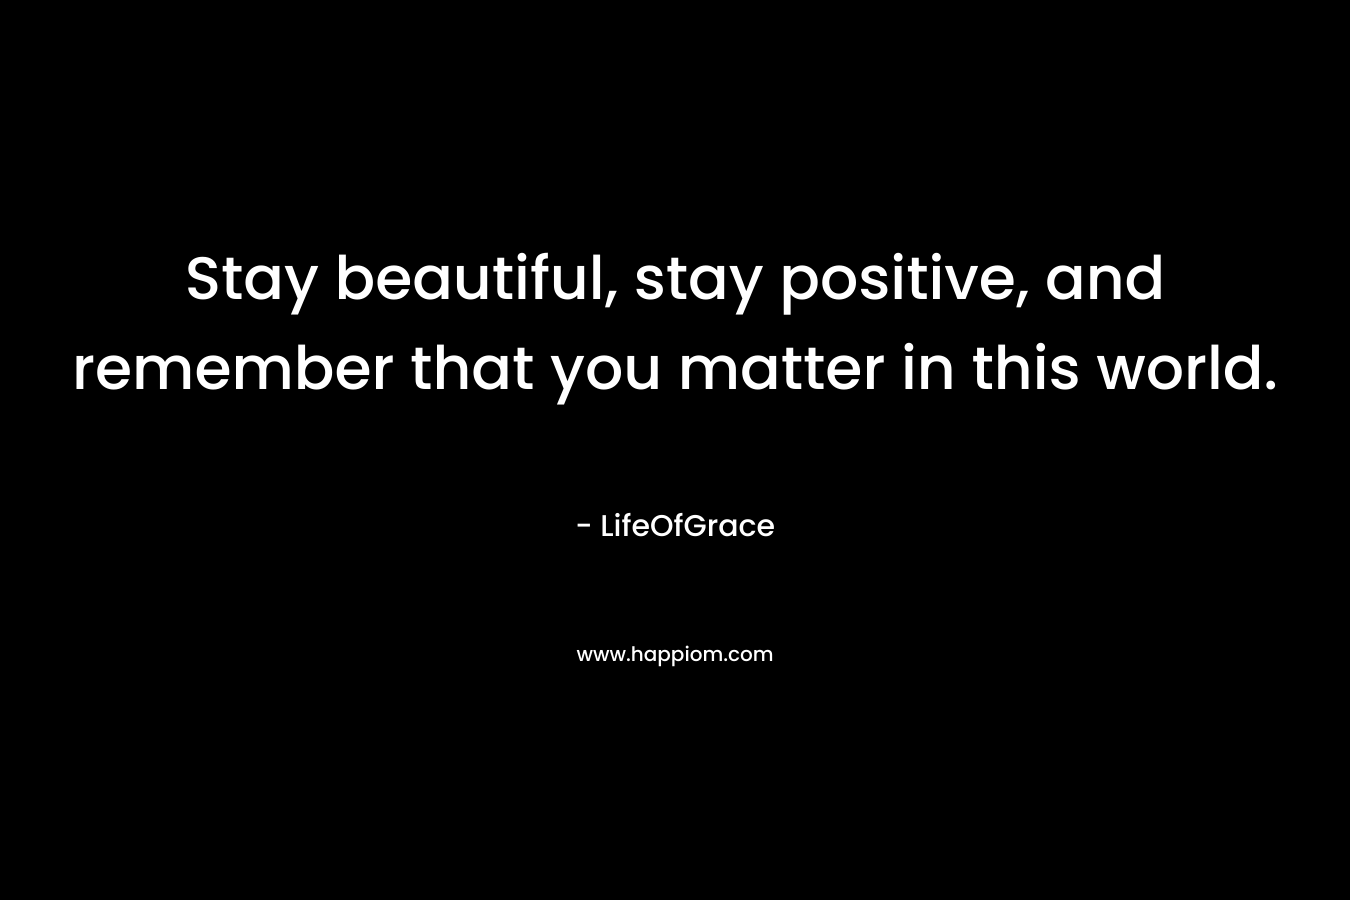 Stay beautiful, stay positive, and remember that you matter in this world.